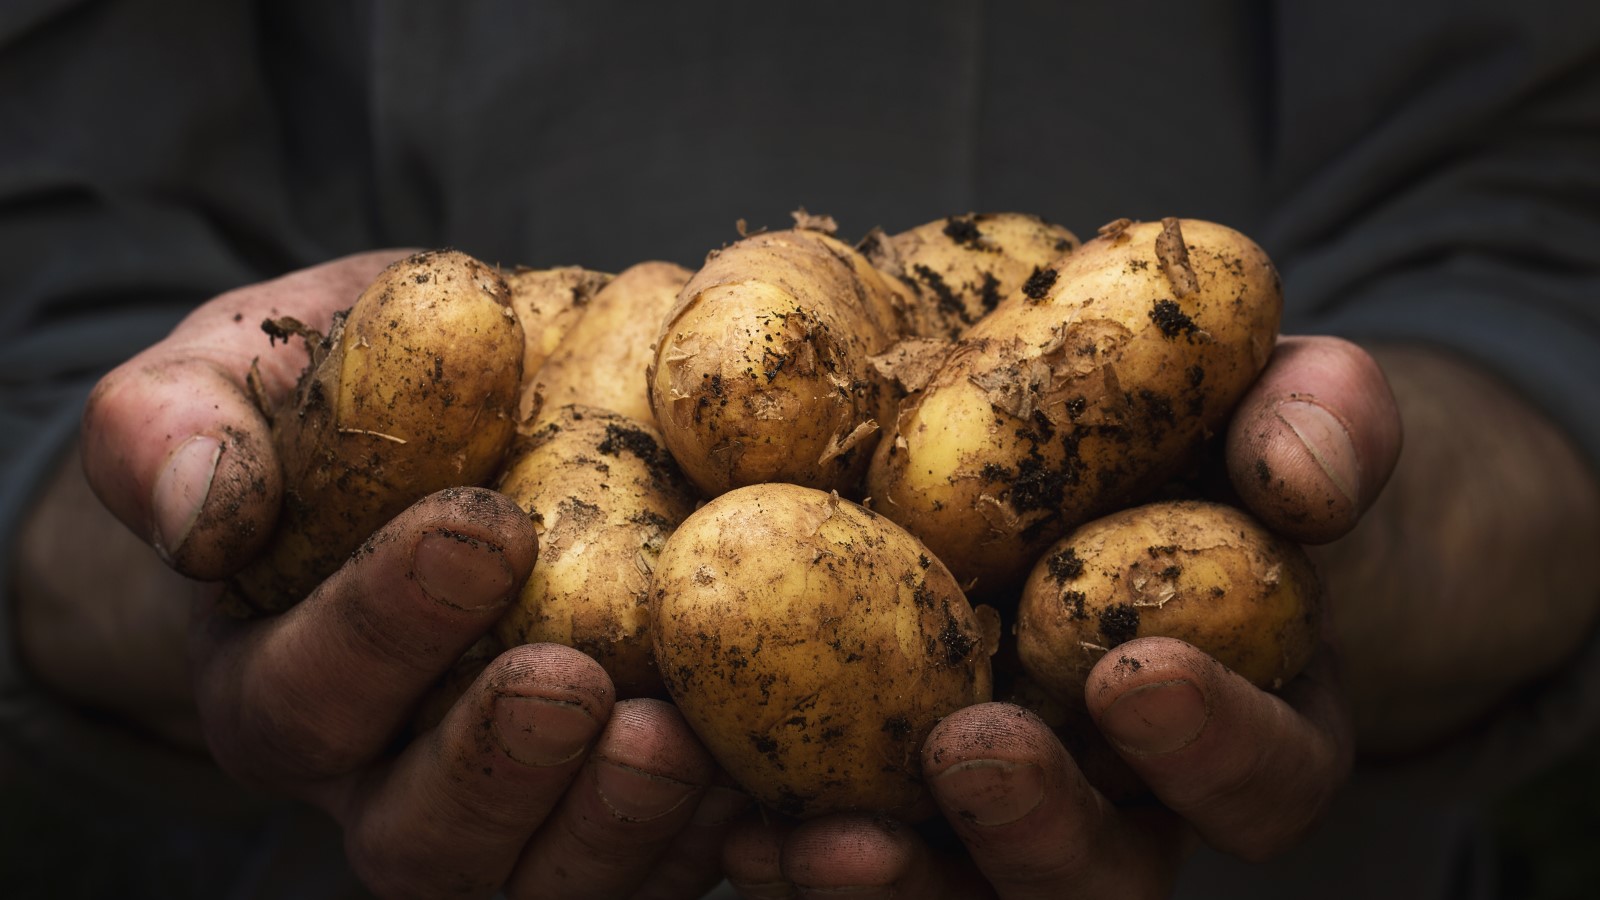 How to grow potatoes indoors: tips for year-round harvests